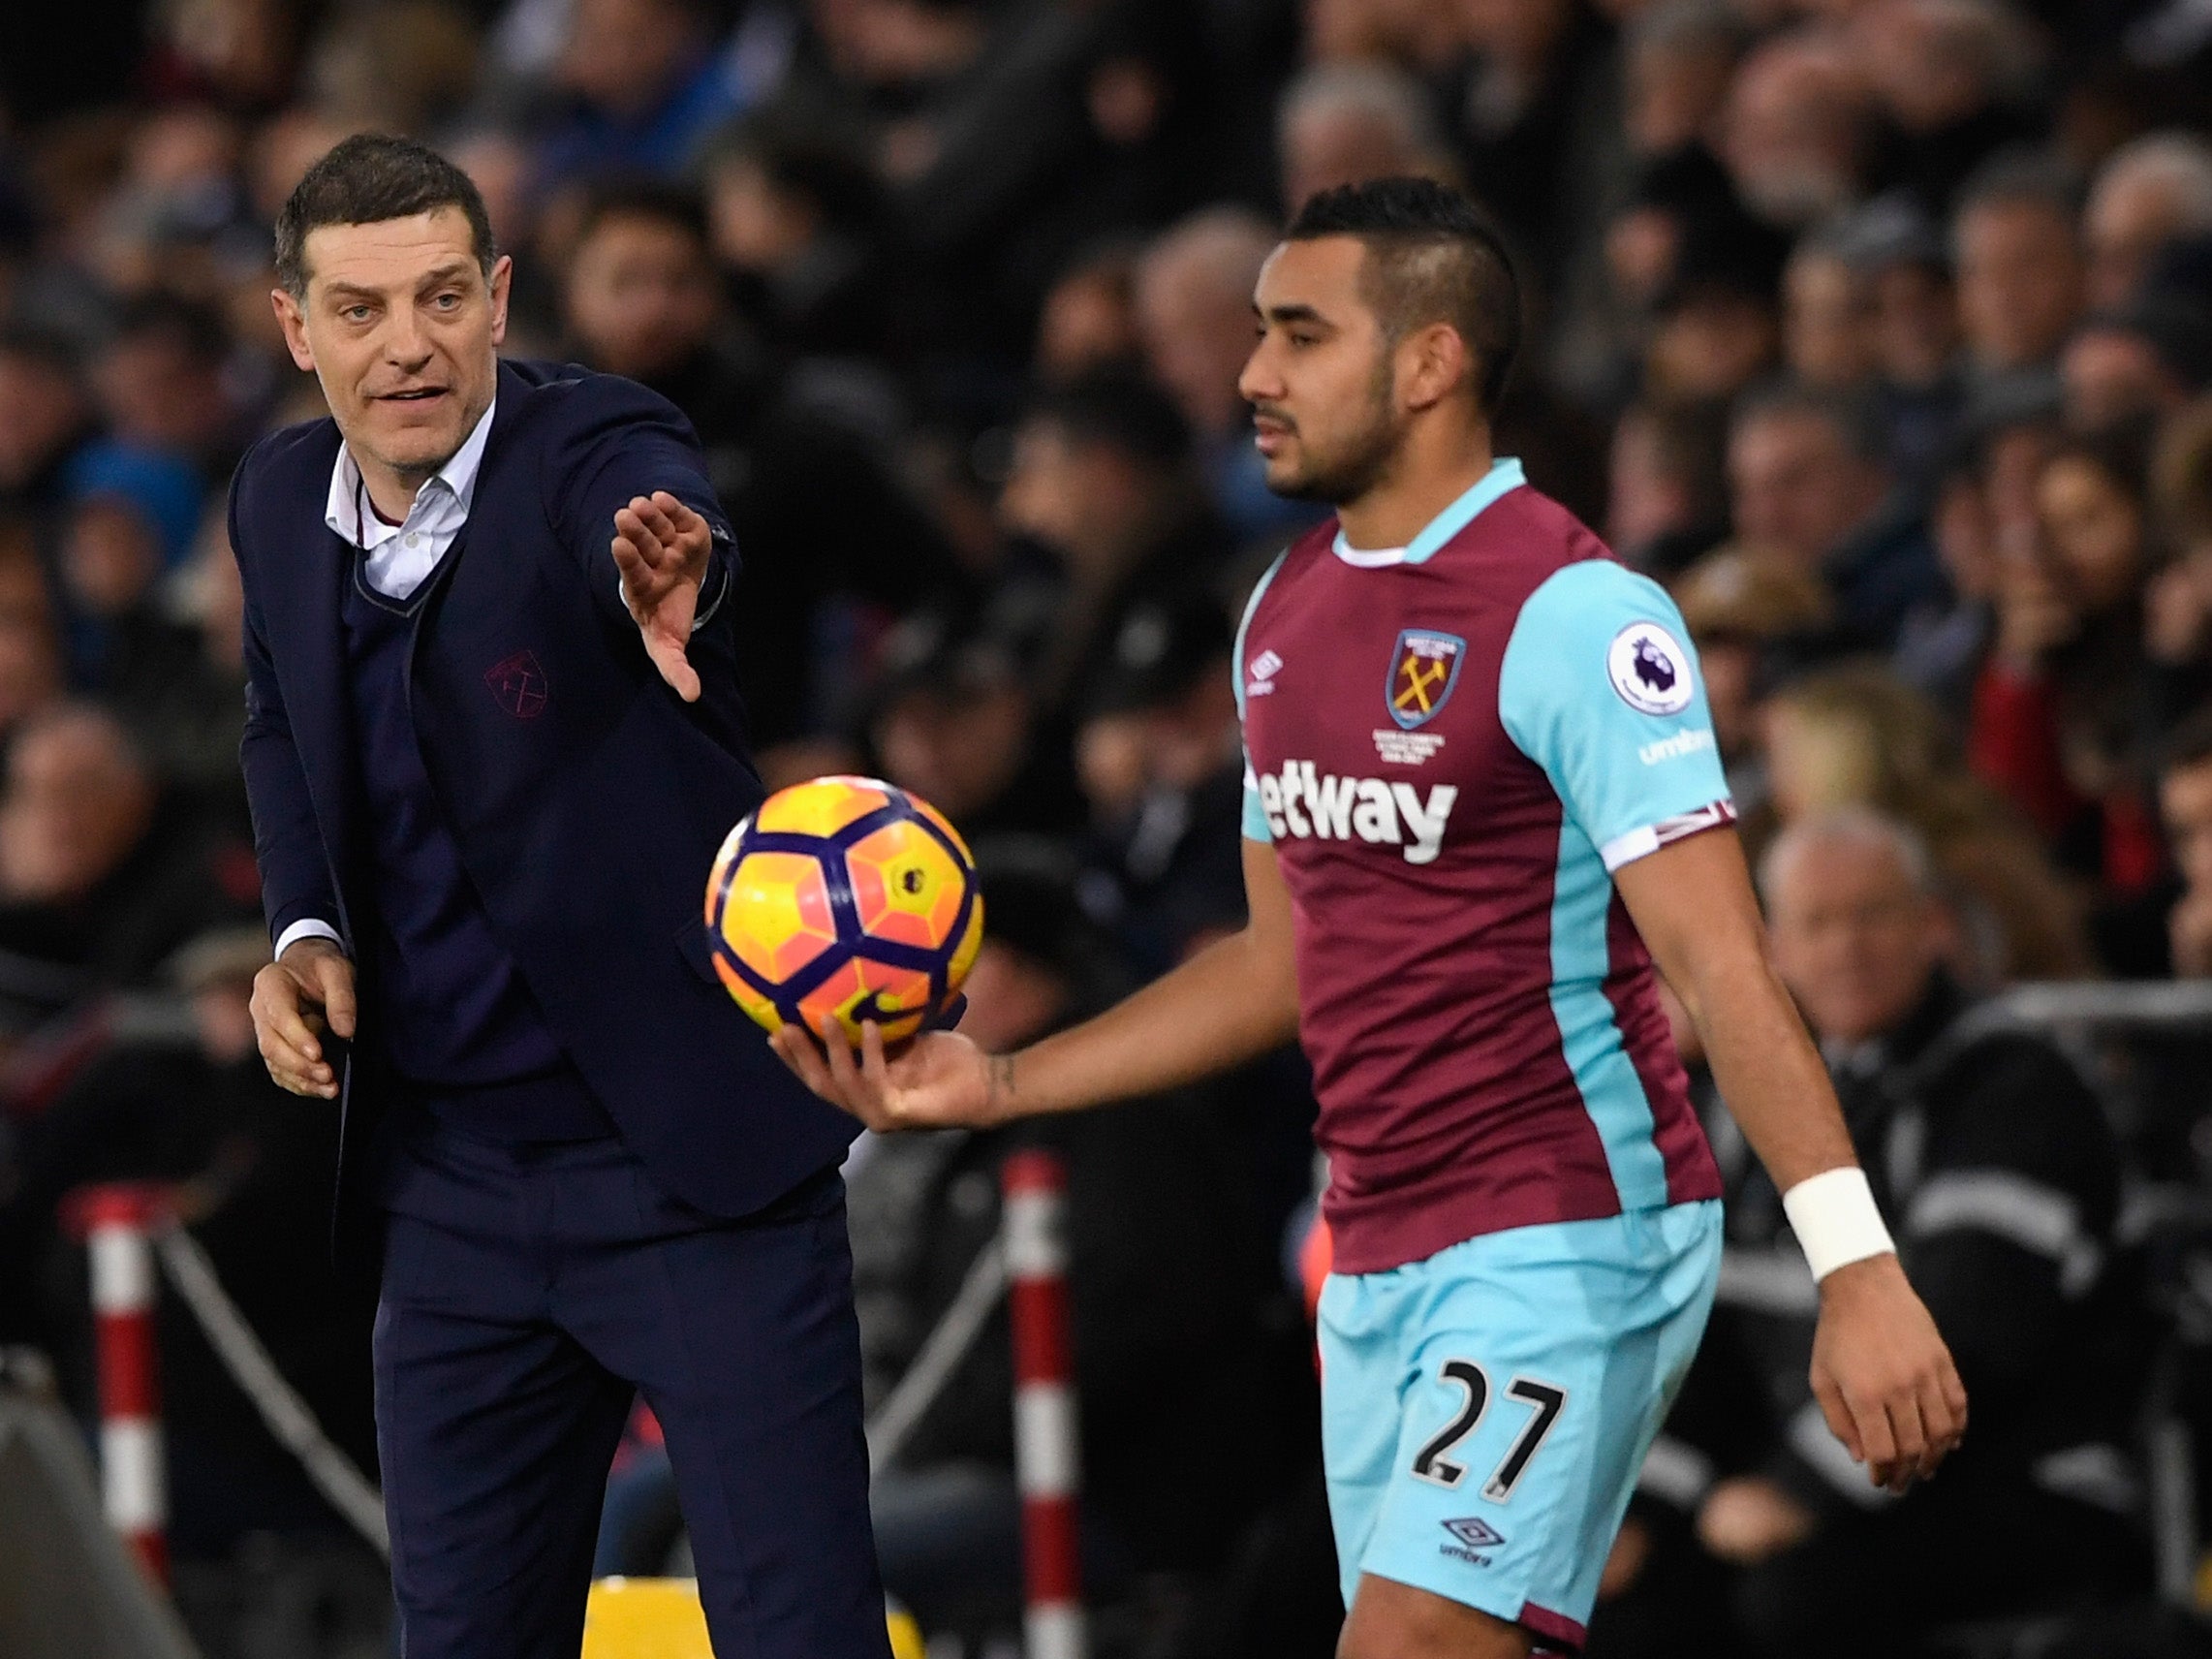 Payet believed he would regress if he stayed at West Ham